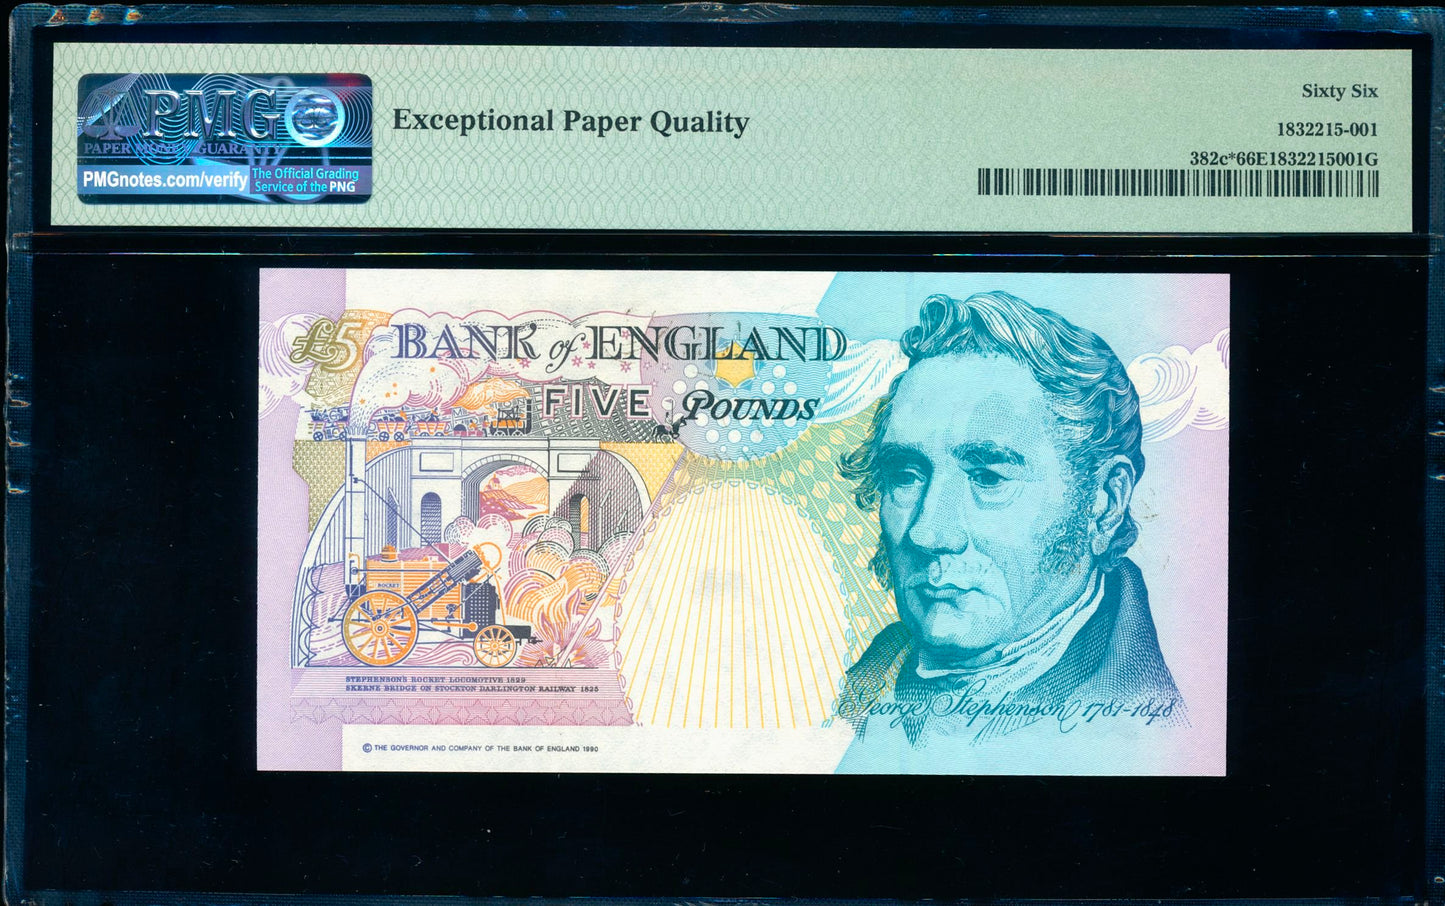 P.382Ab B381 1999-2002 Bank of England Lowther Replacement £5 LL10 GEM UNC 66 EPQ